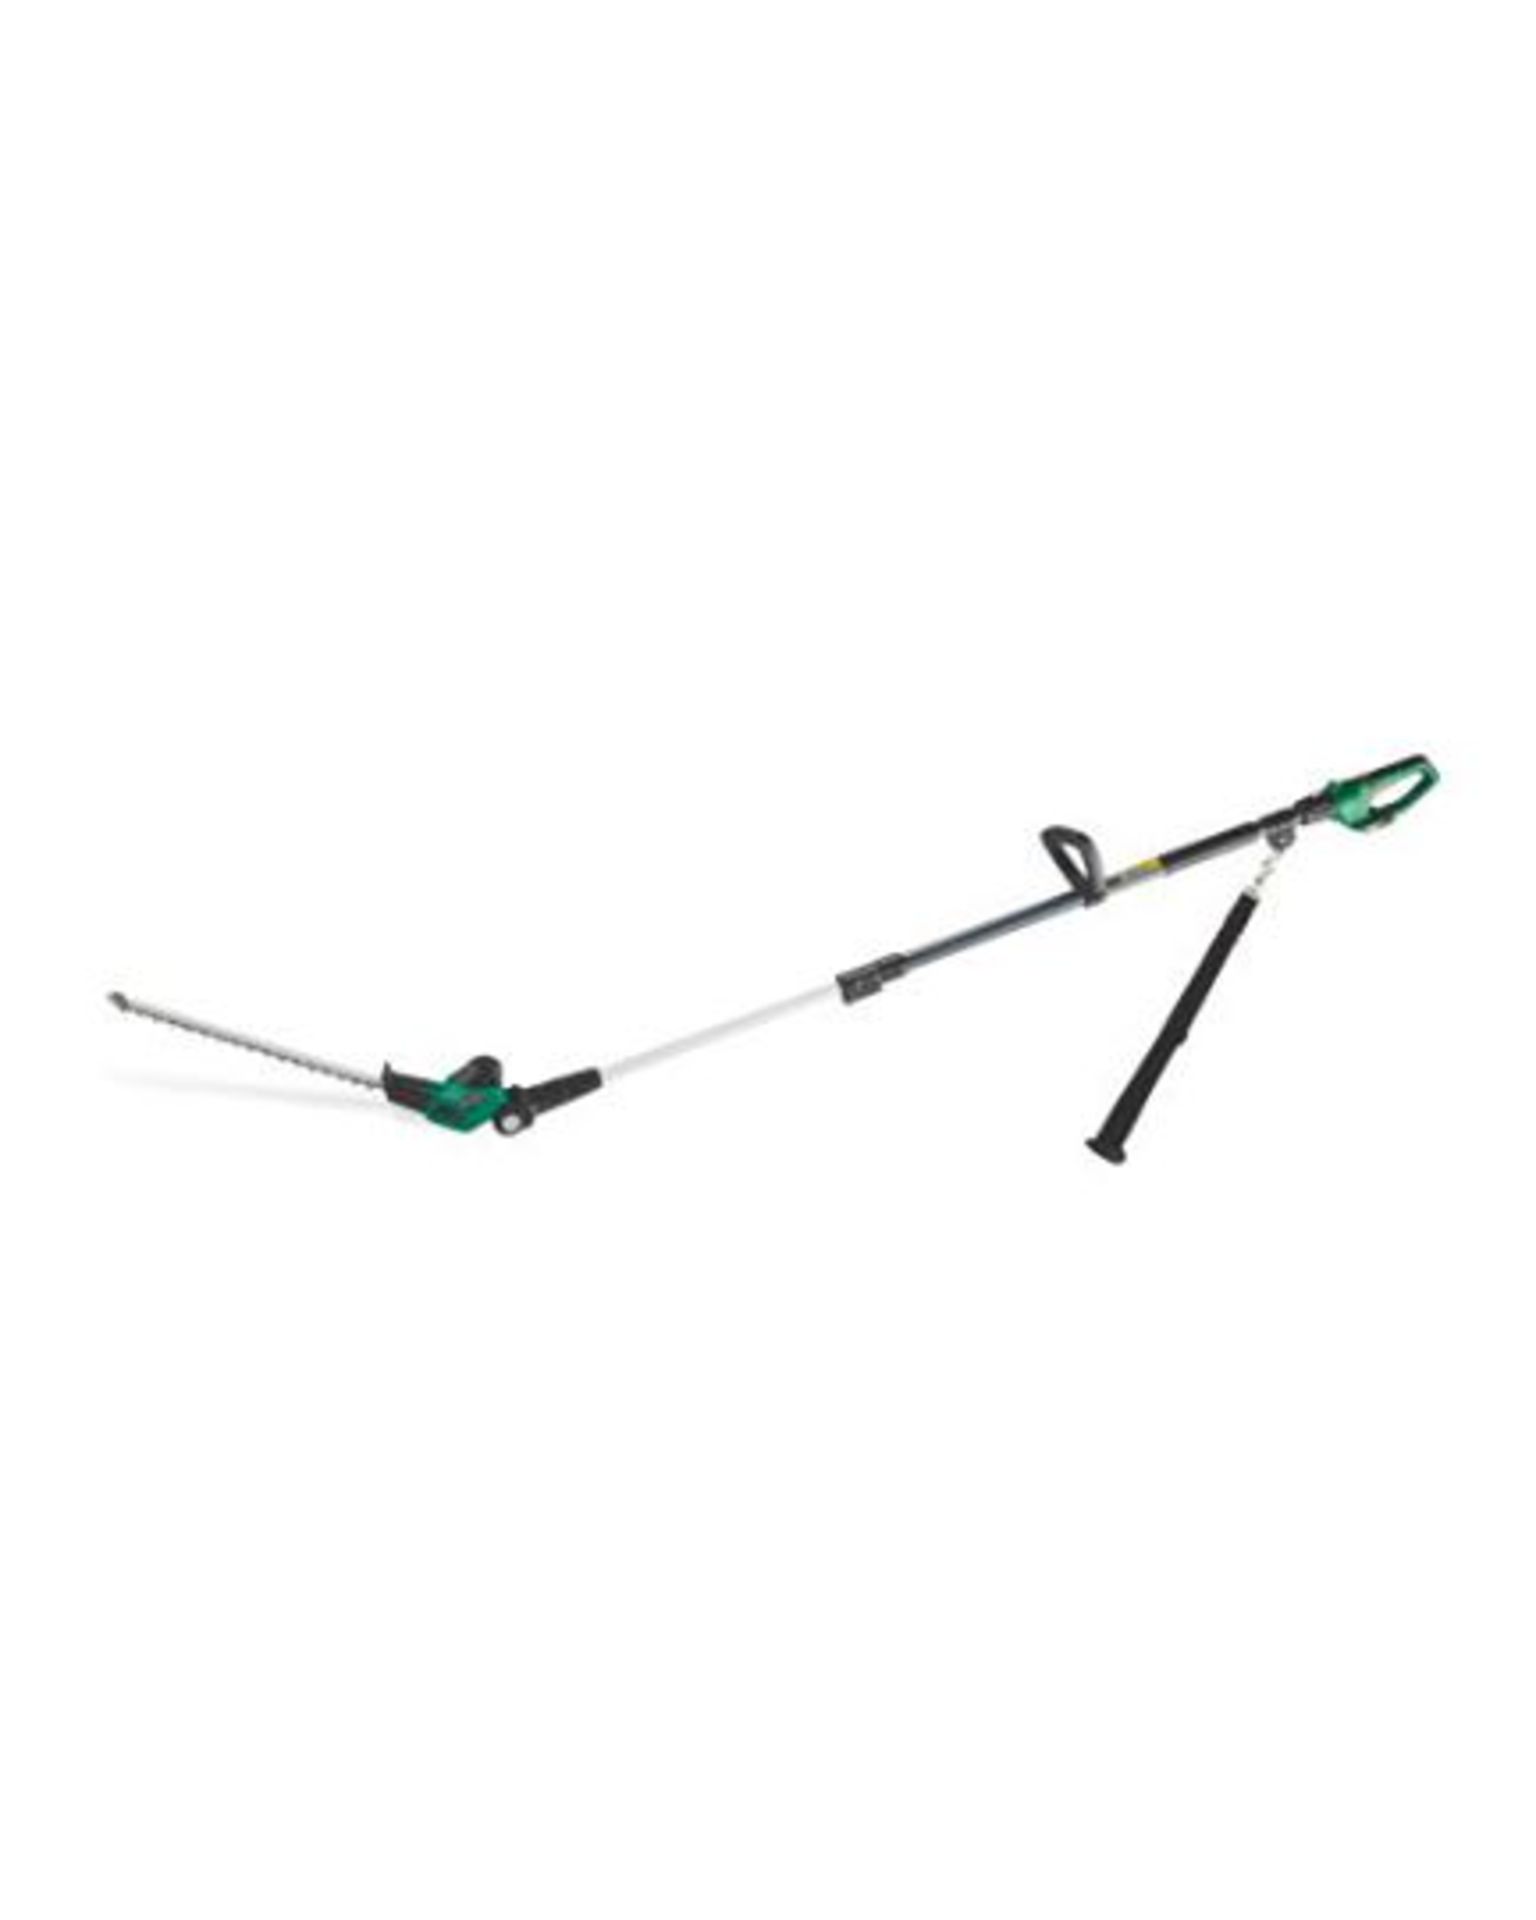 2 X Ferrex Telescopic Hedge Trimmer Skin Battery And Charger Not Included - Image 3 of 3